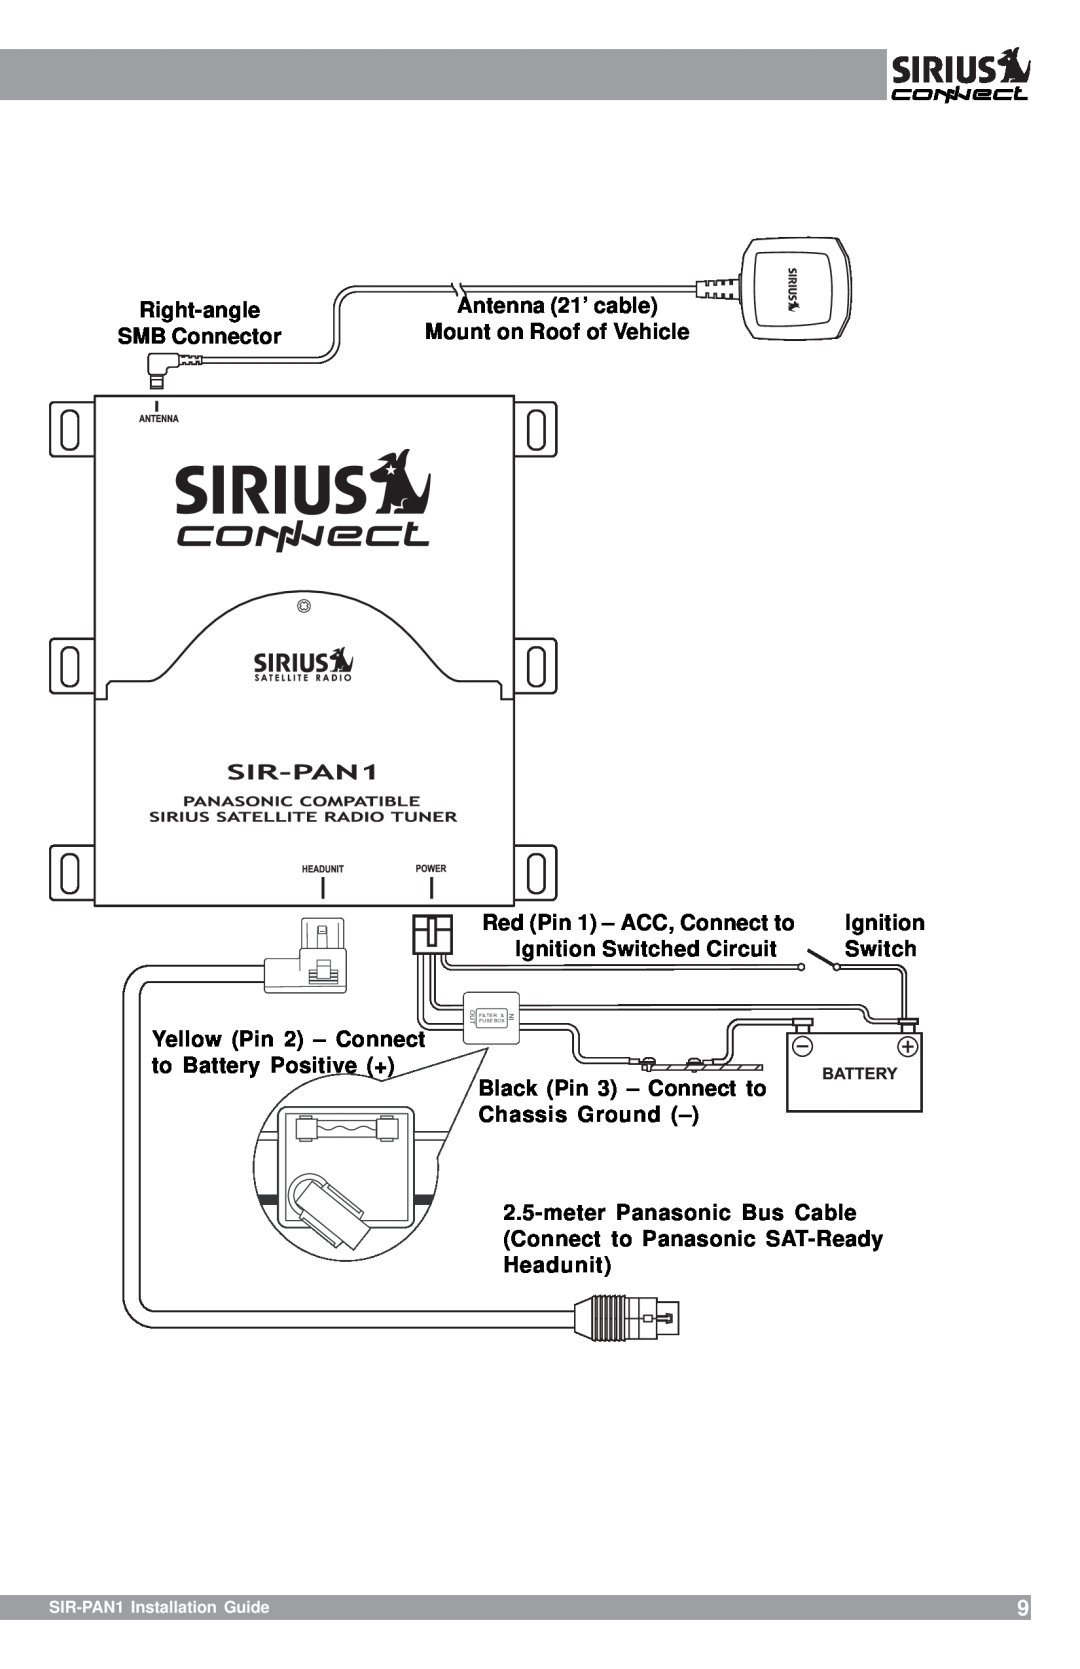 Sirius Satellite Radio SIR-PAN1 Right-angle, Antenna 21’ cable, SMB Connector, Red Pin 1 - ACC, Connect to, Switch, Filter 